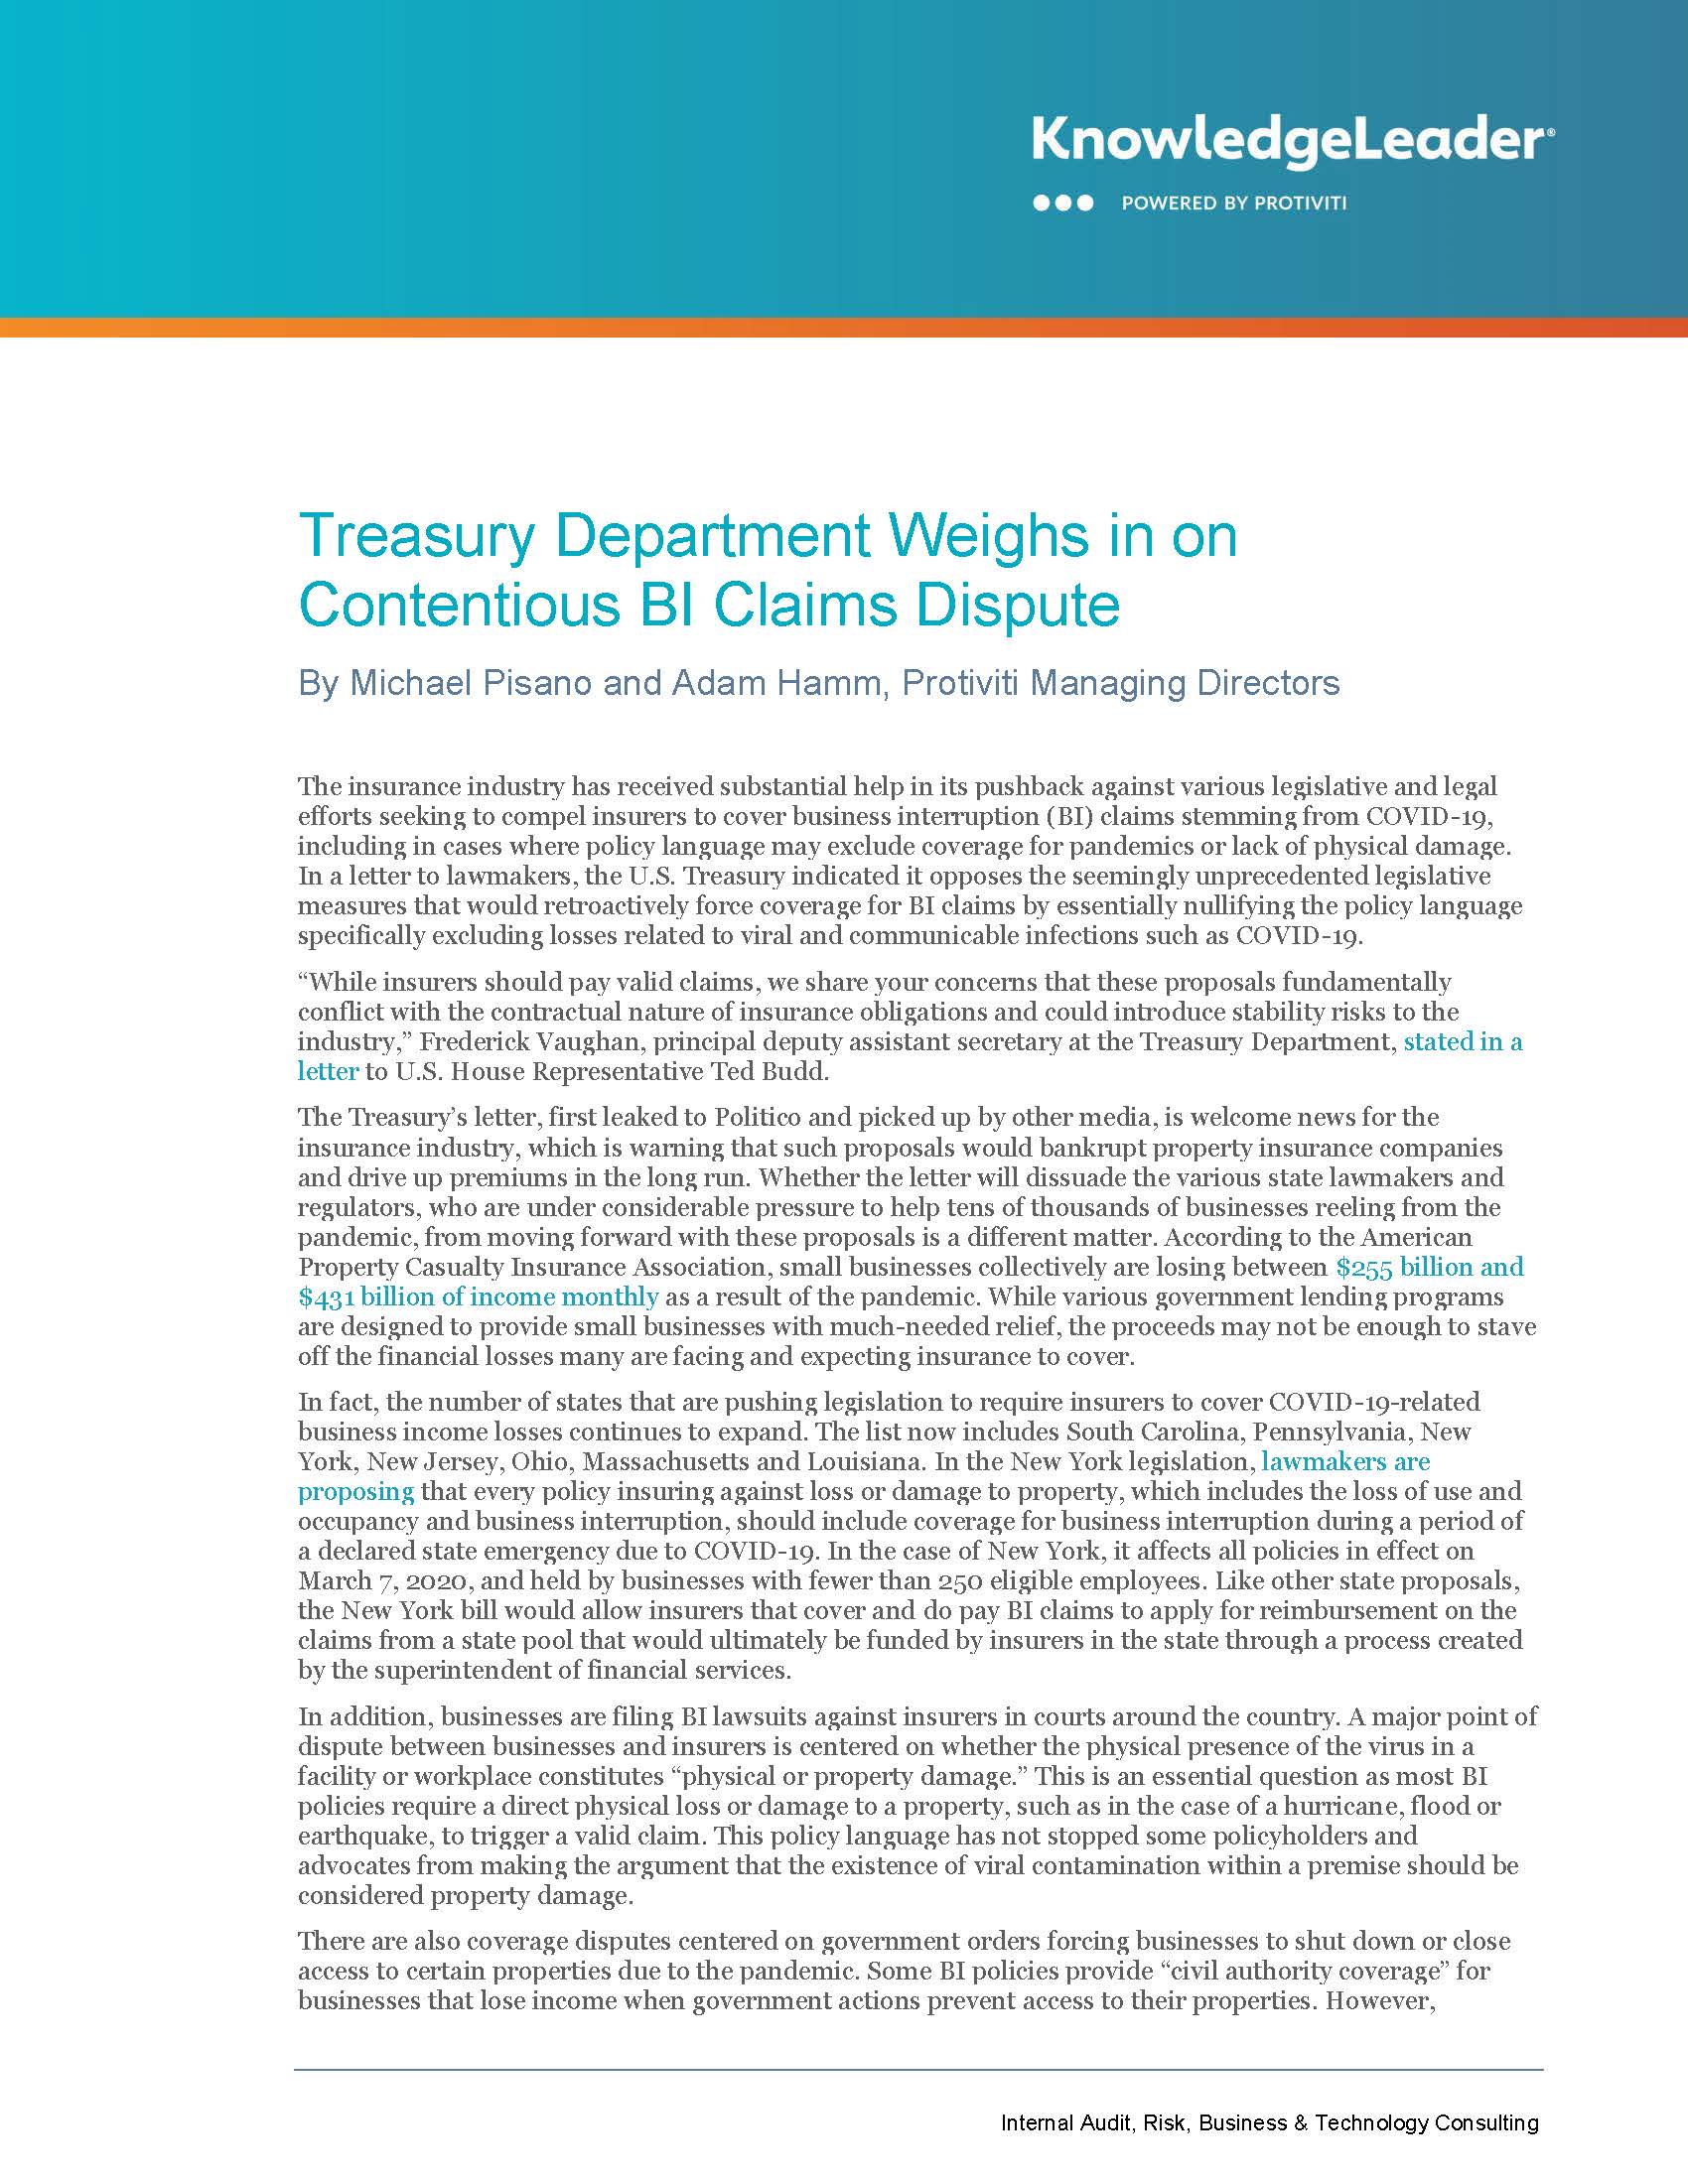 Screenshot of first page of Treasury Department Weighs in on Contentious BI Claims Dispute